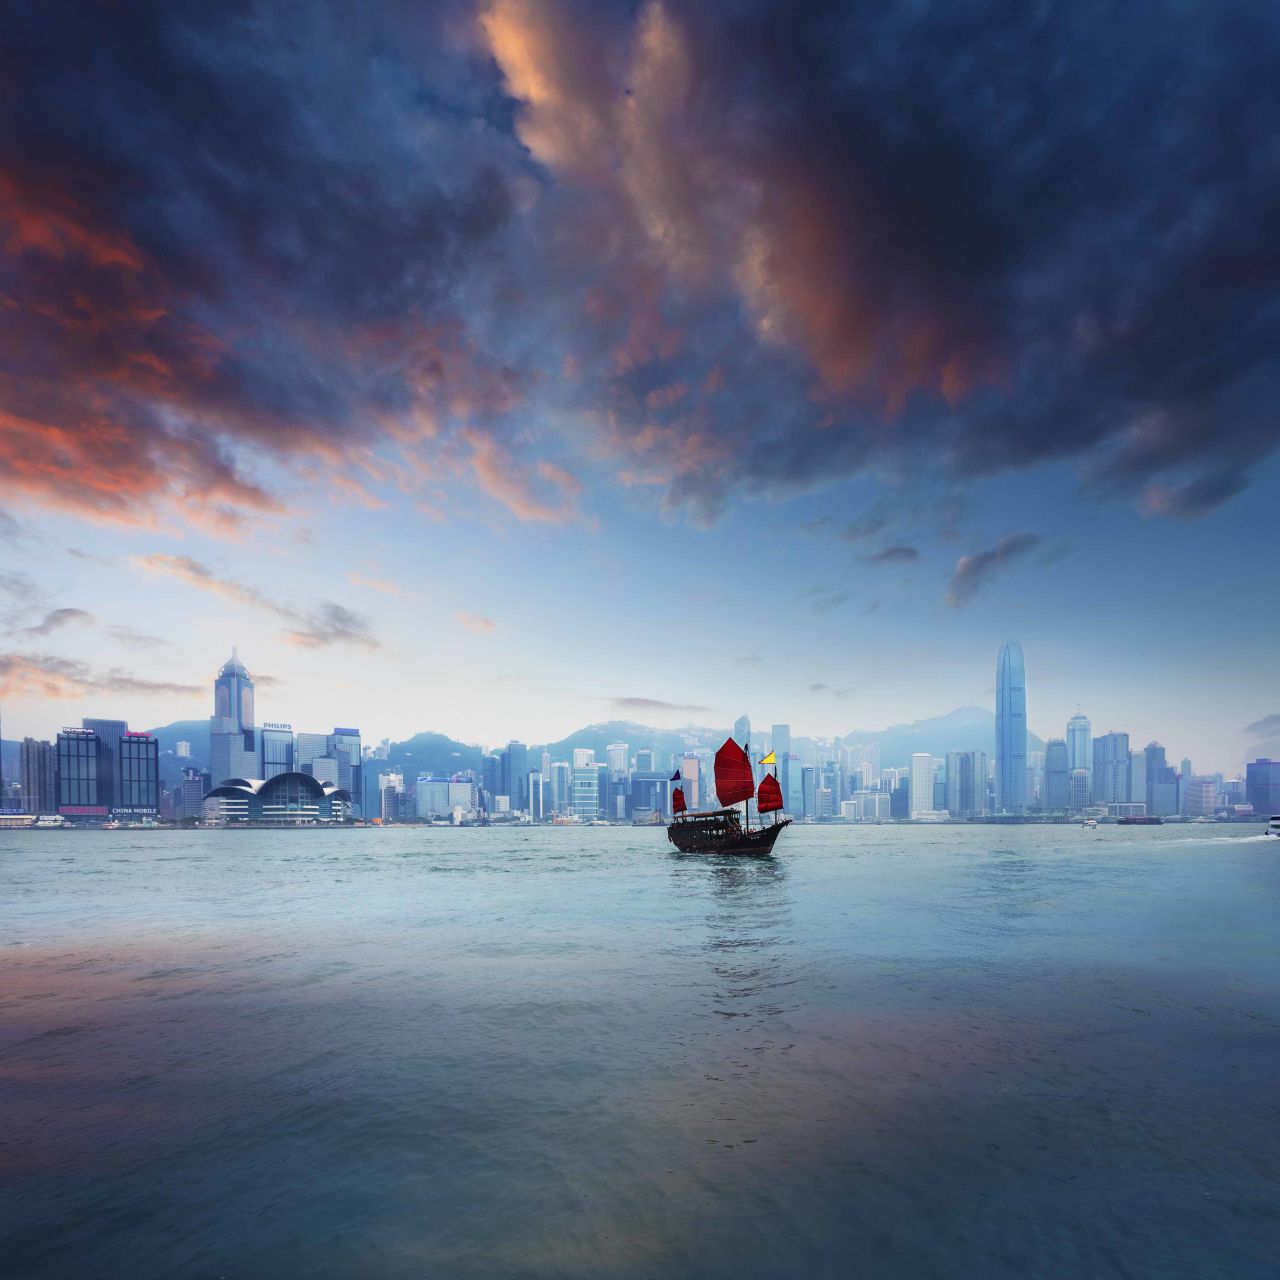 A junk boat set against the famous skyline might be the iconic shot of Hong Kong, but Lonely Planet picked the territory for its natural heritage miles away from Victoria Harbor.